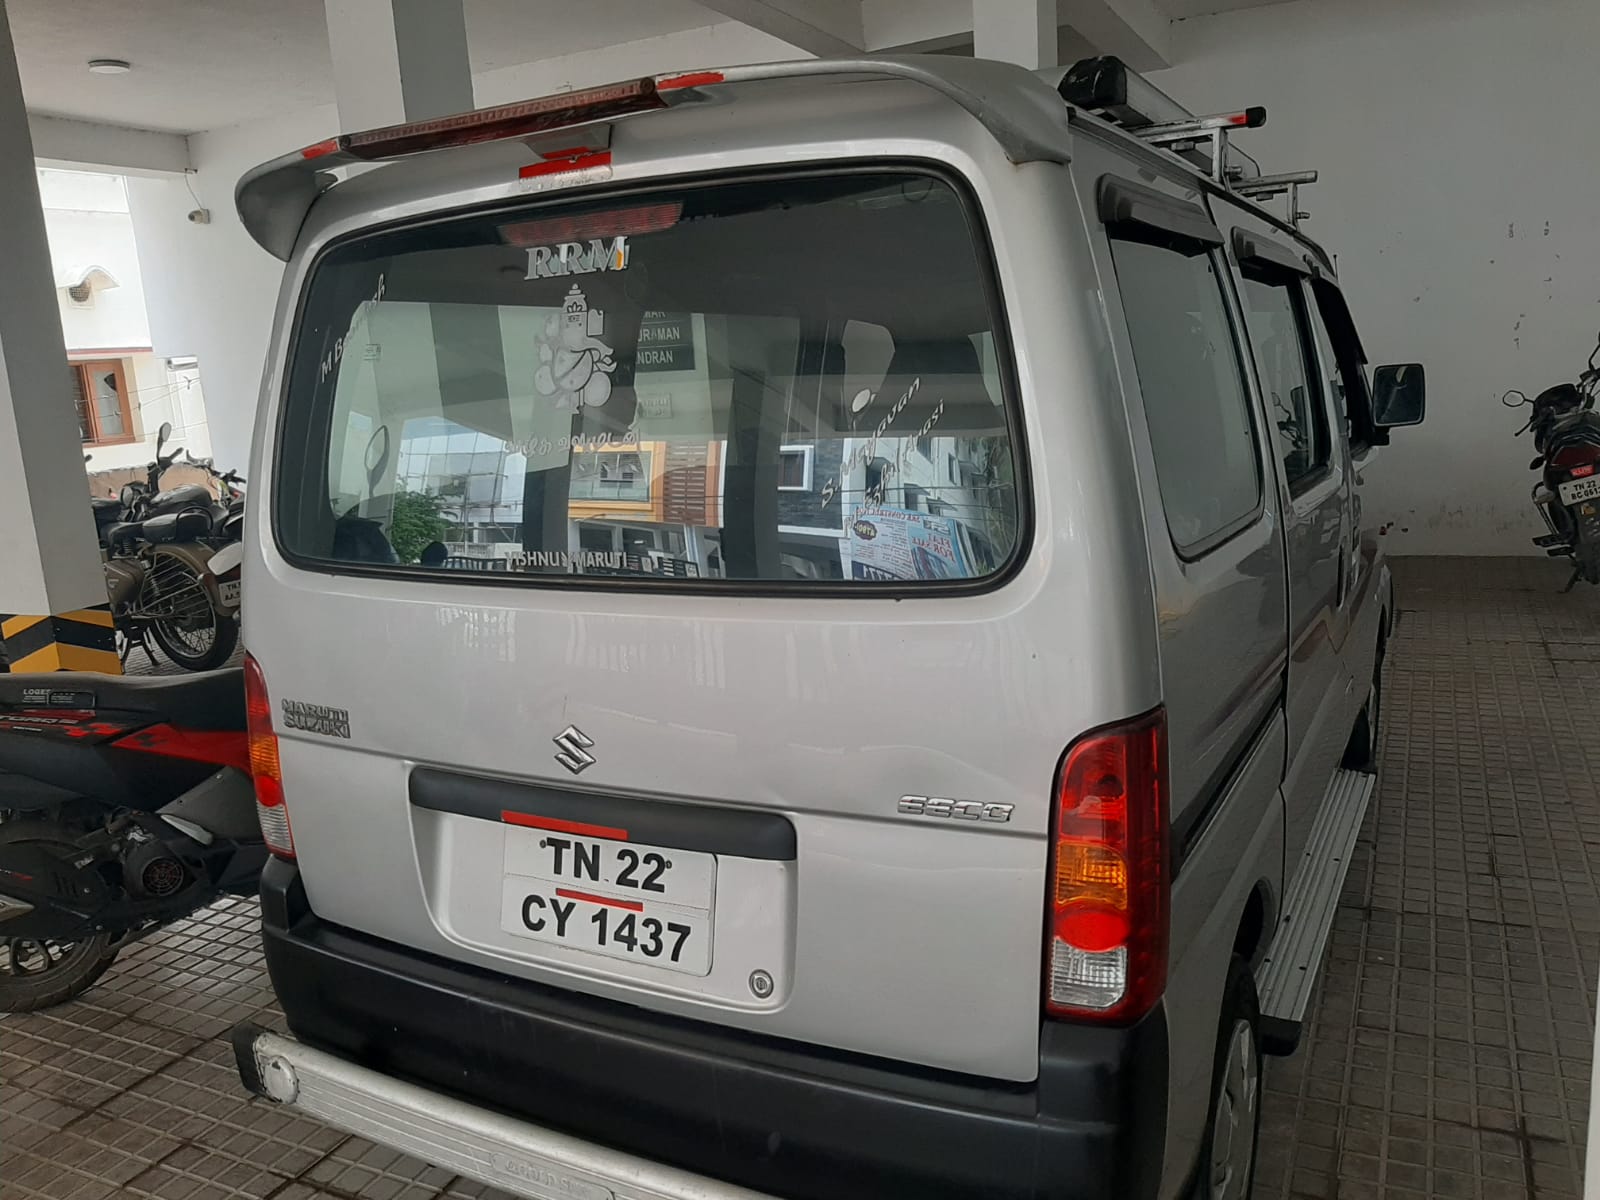 3734-for-sale-Maruthi-Suzuki-Eeco-Petrol-Second-Owner-2011-TN-registered-rs-254000